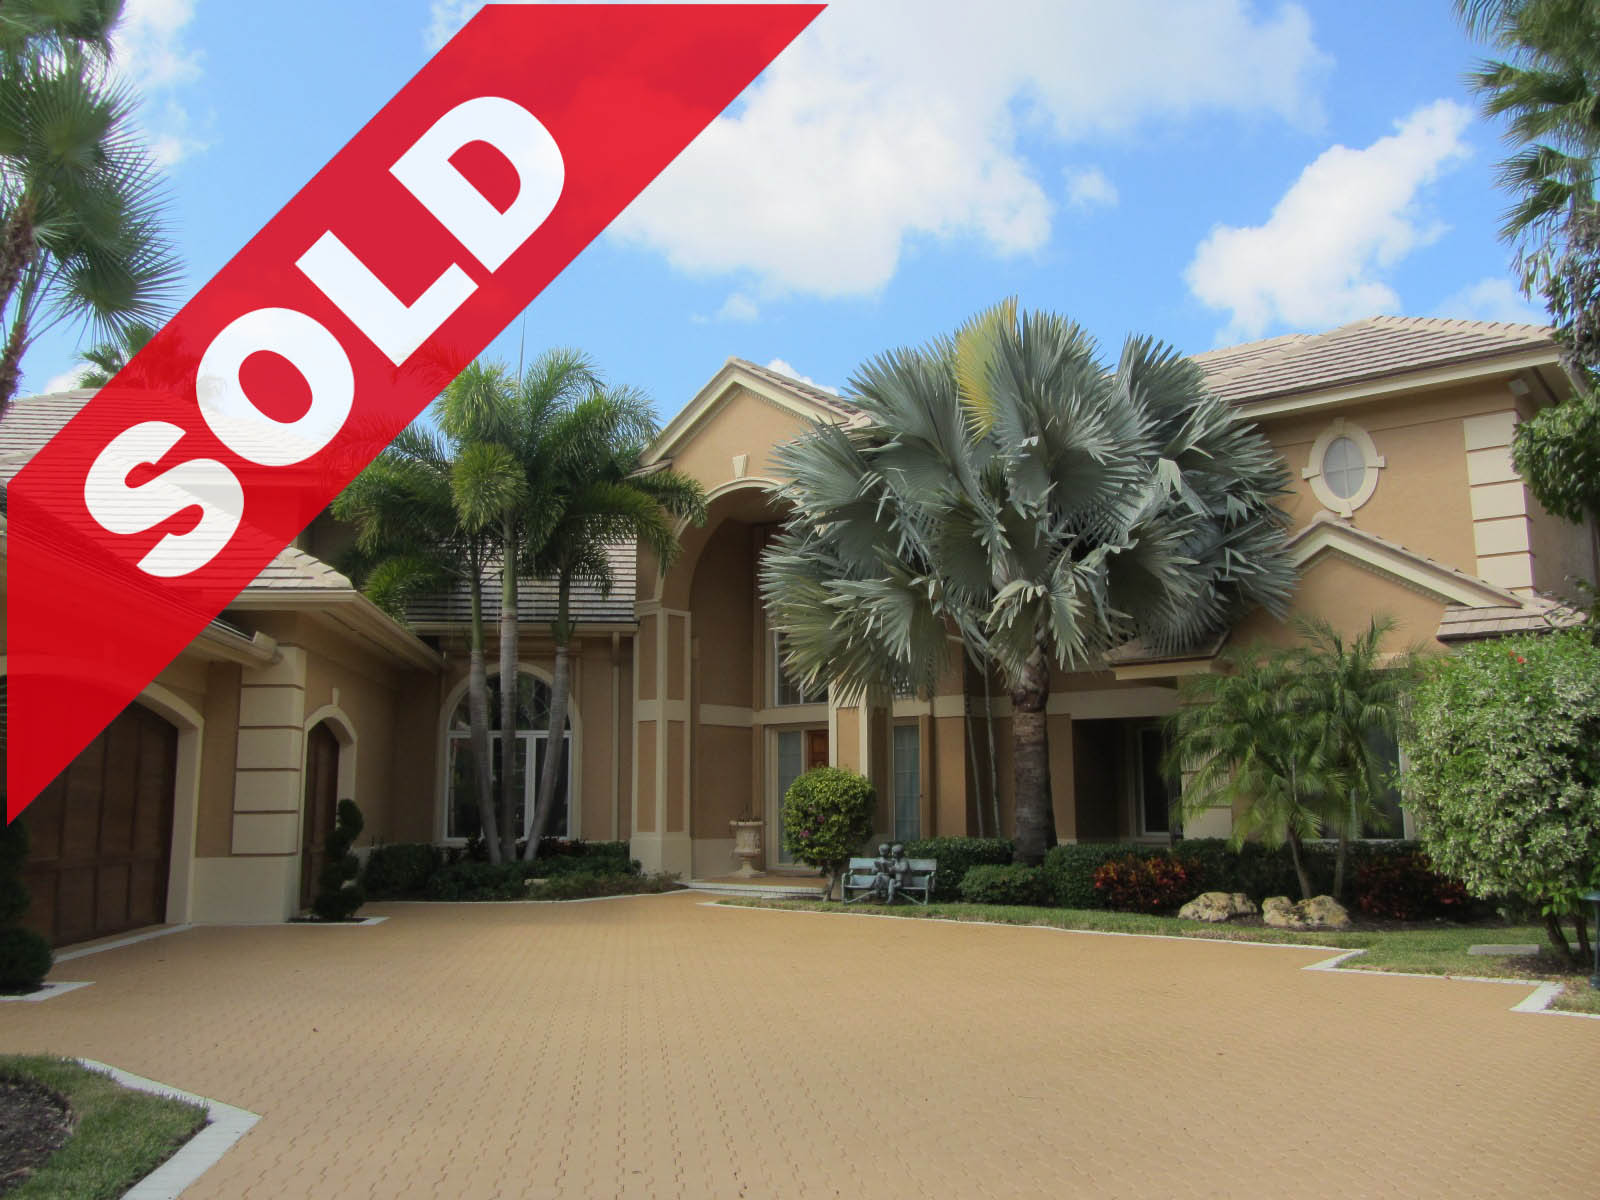 SOLD - Spectacular custom built Jonathan's Landing Casseeky Island estate home with surrounding waterways, astounding scenic views and direct Intracoastal access!